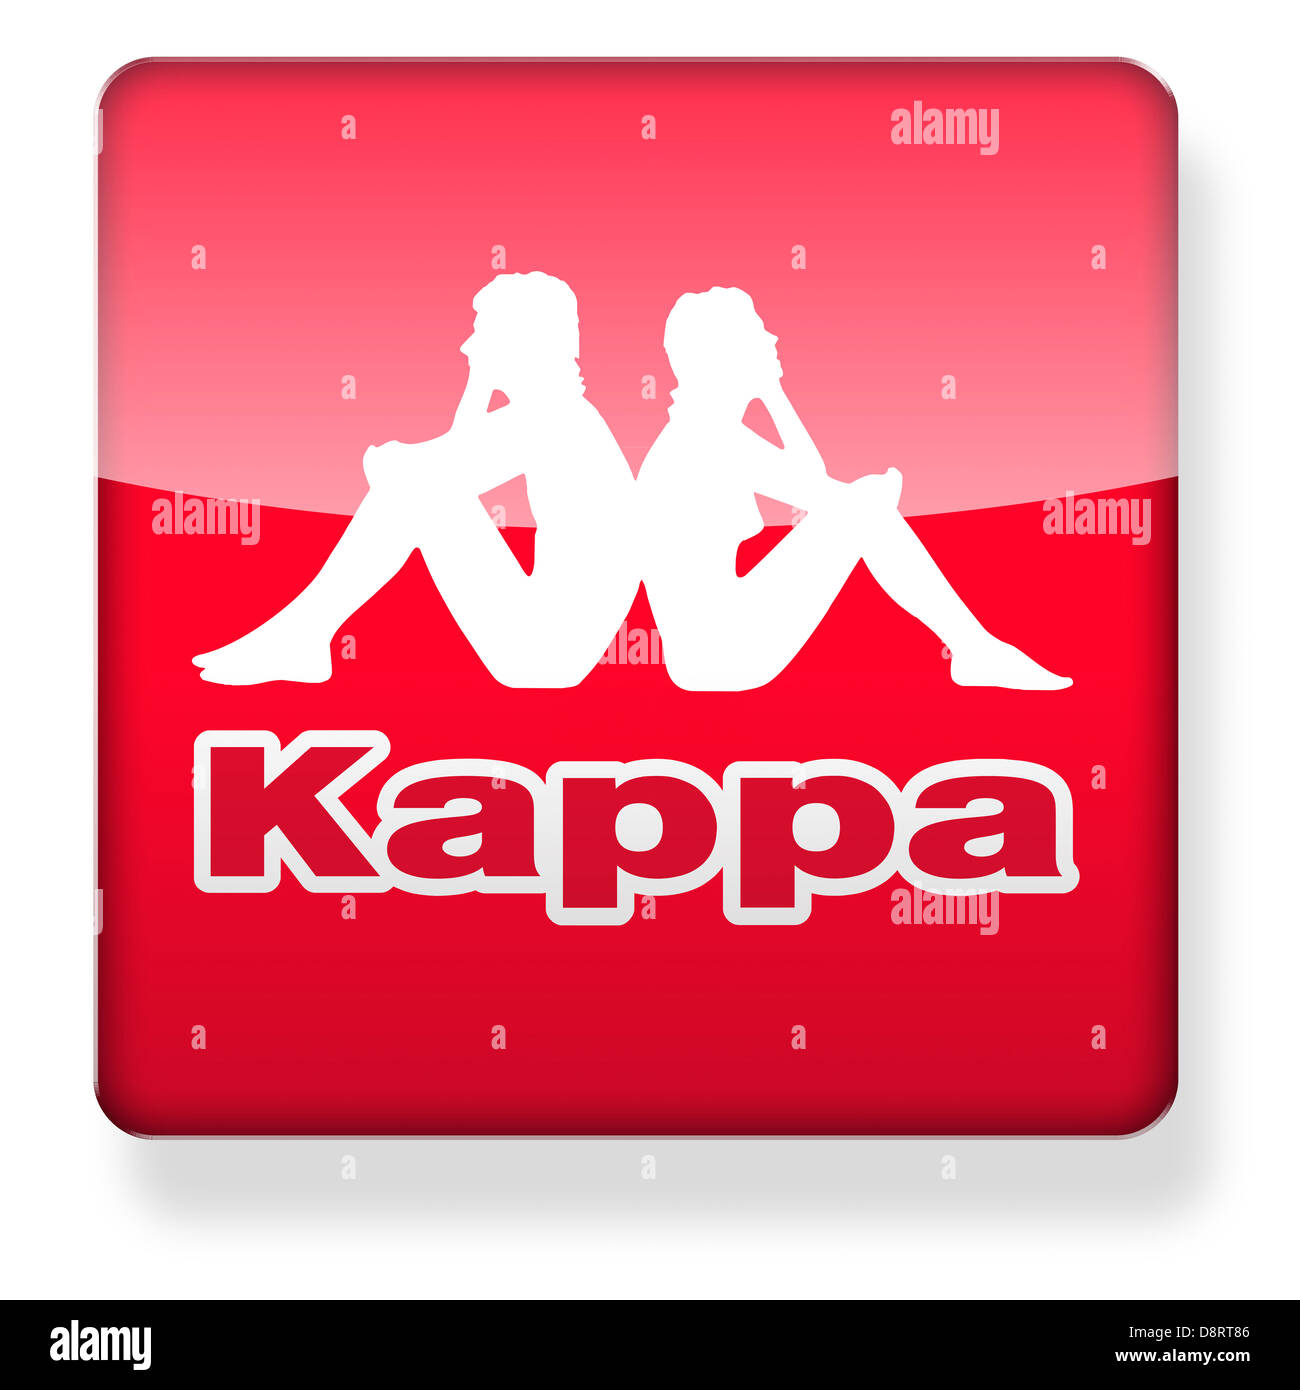 Kappa logo Cut Out Stock Images & Pictures - Alamy